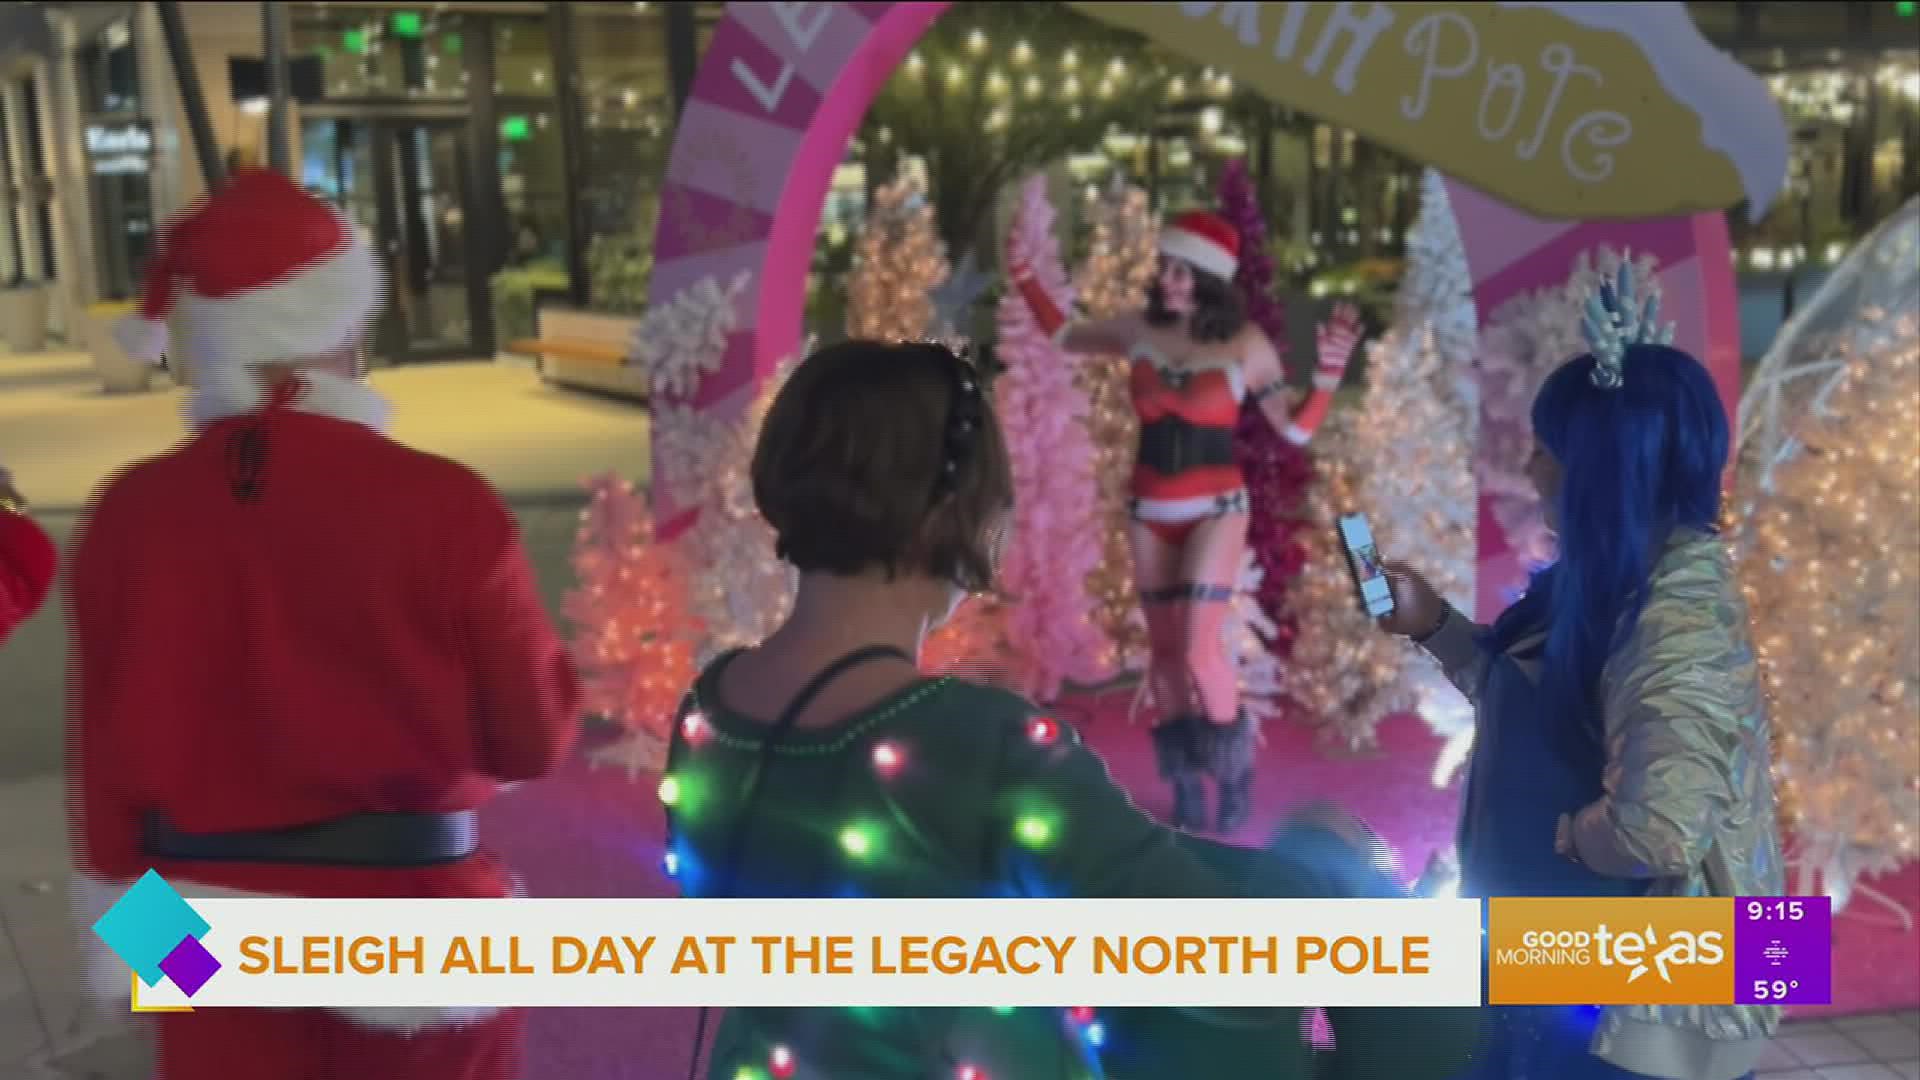 With a little help from Santa’s elves, Legacy West has once again transformed into the Legacy North Pole for the holiday season.